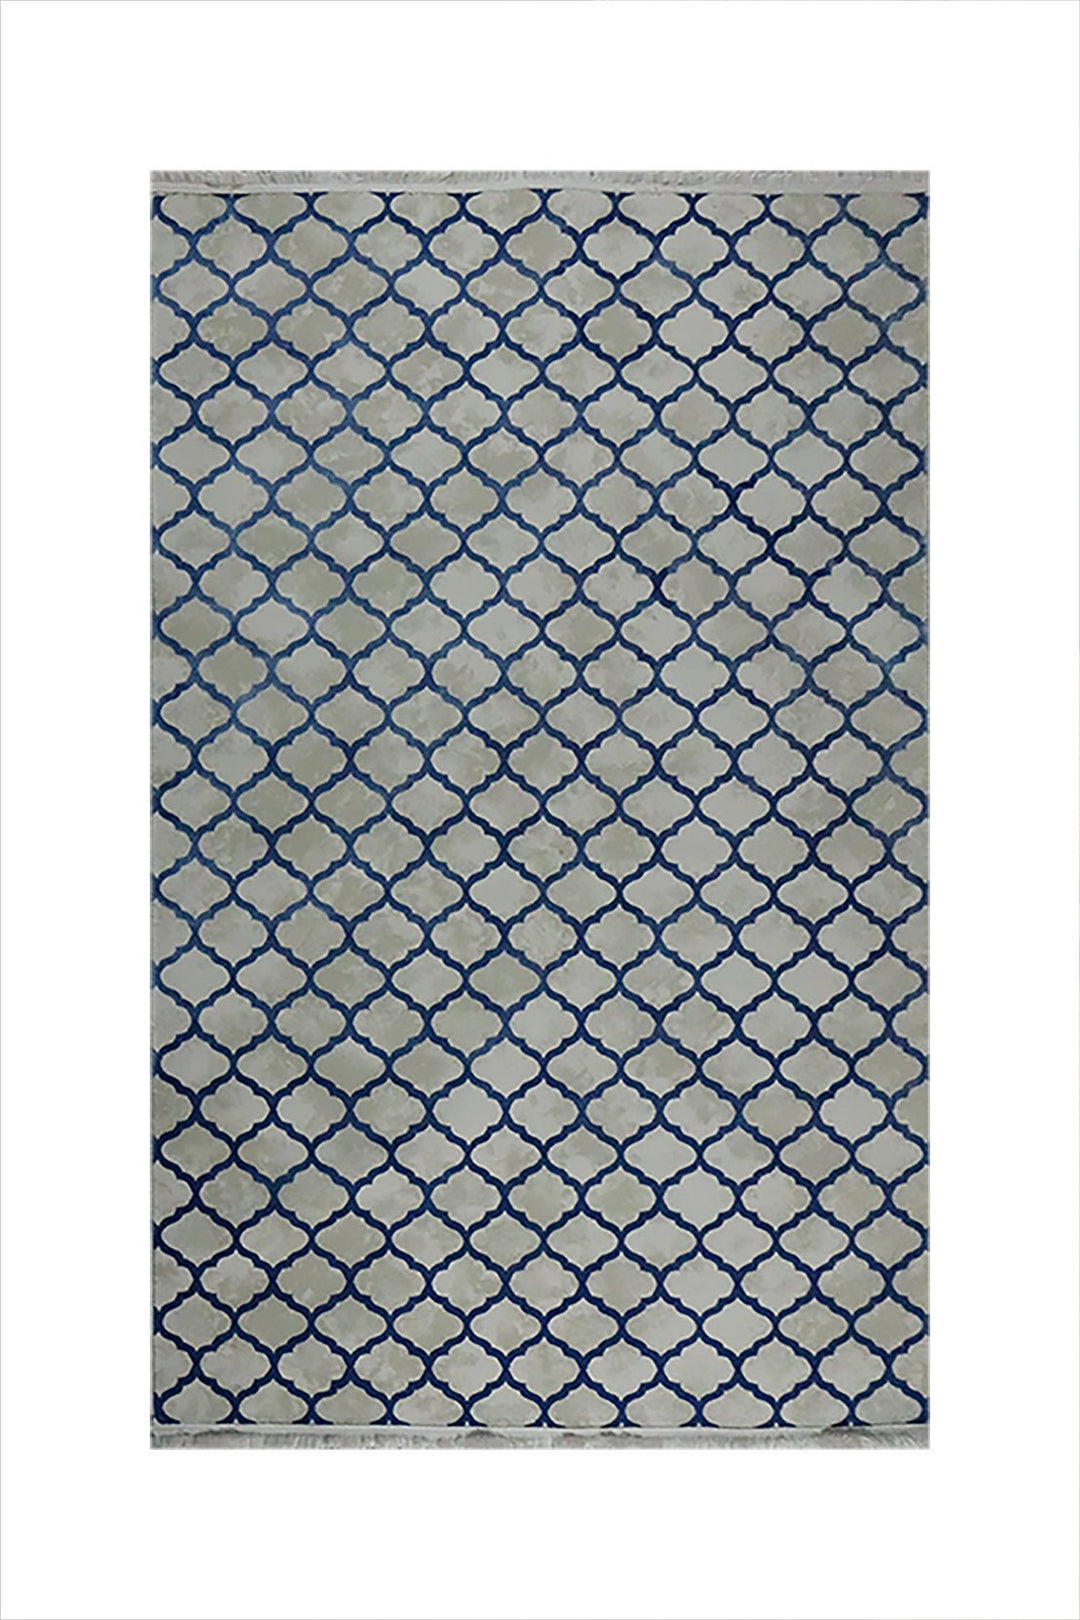 Turkish Modern Festival 1 Rug - 5.2 x 7.5 FT - Gray and Blue - Superior Comfort, Modern Style Accent Rugs - V Surfaces